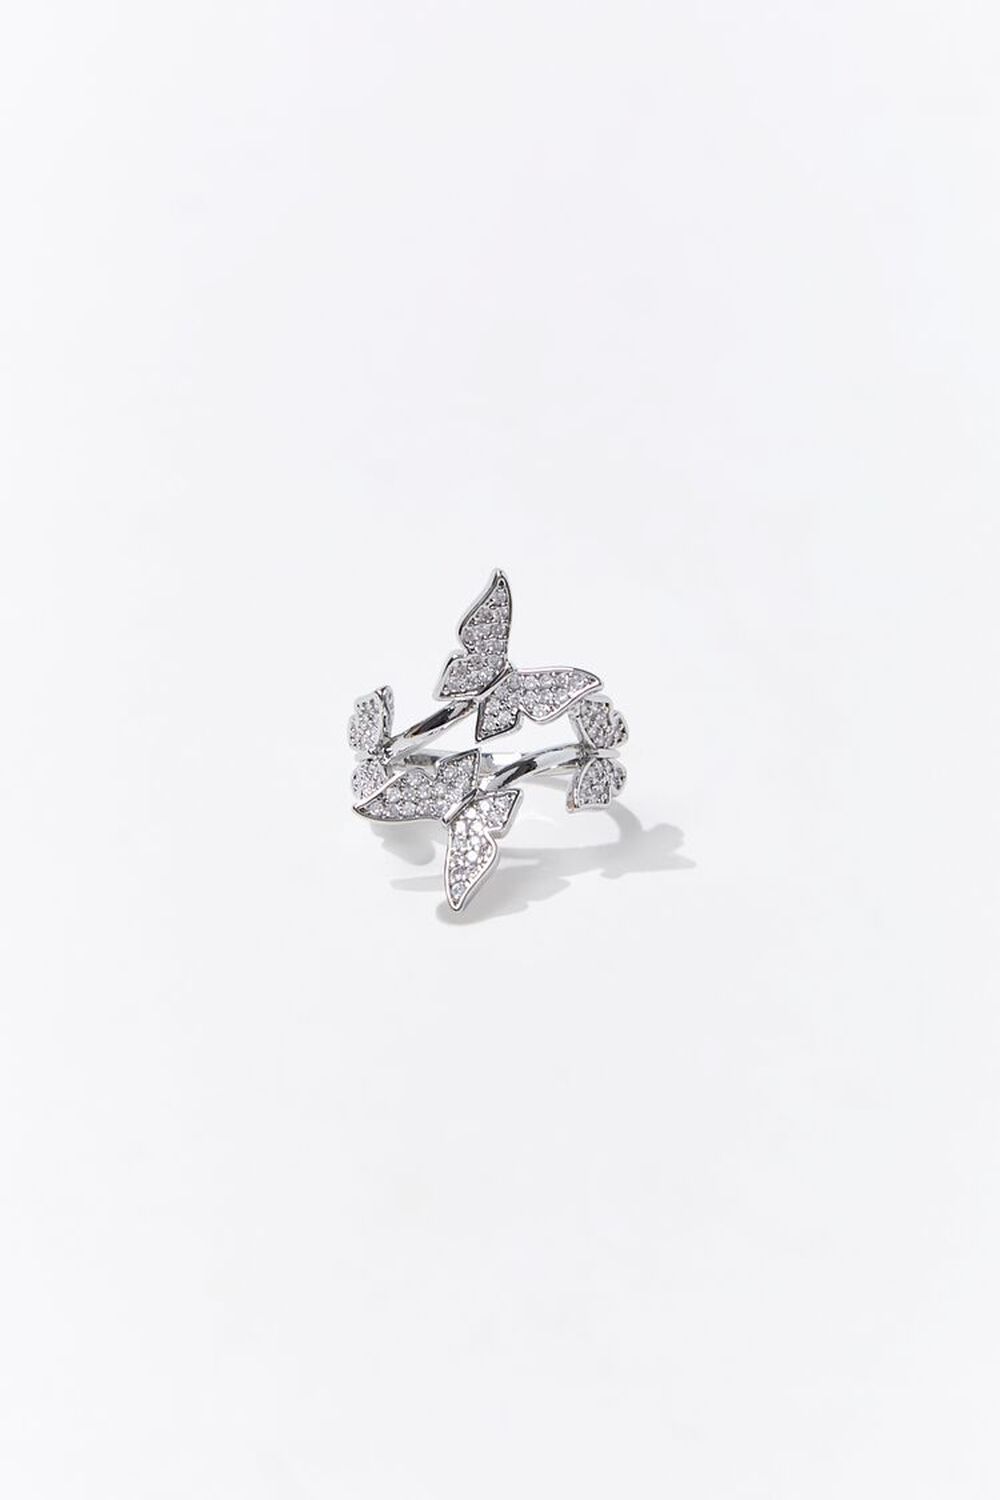 SILVER Butterfly Charm Cocktail Ring, image 1